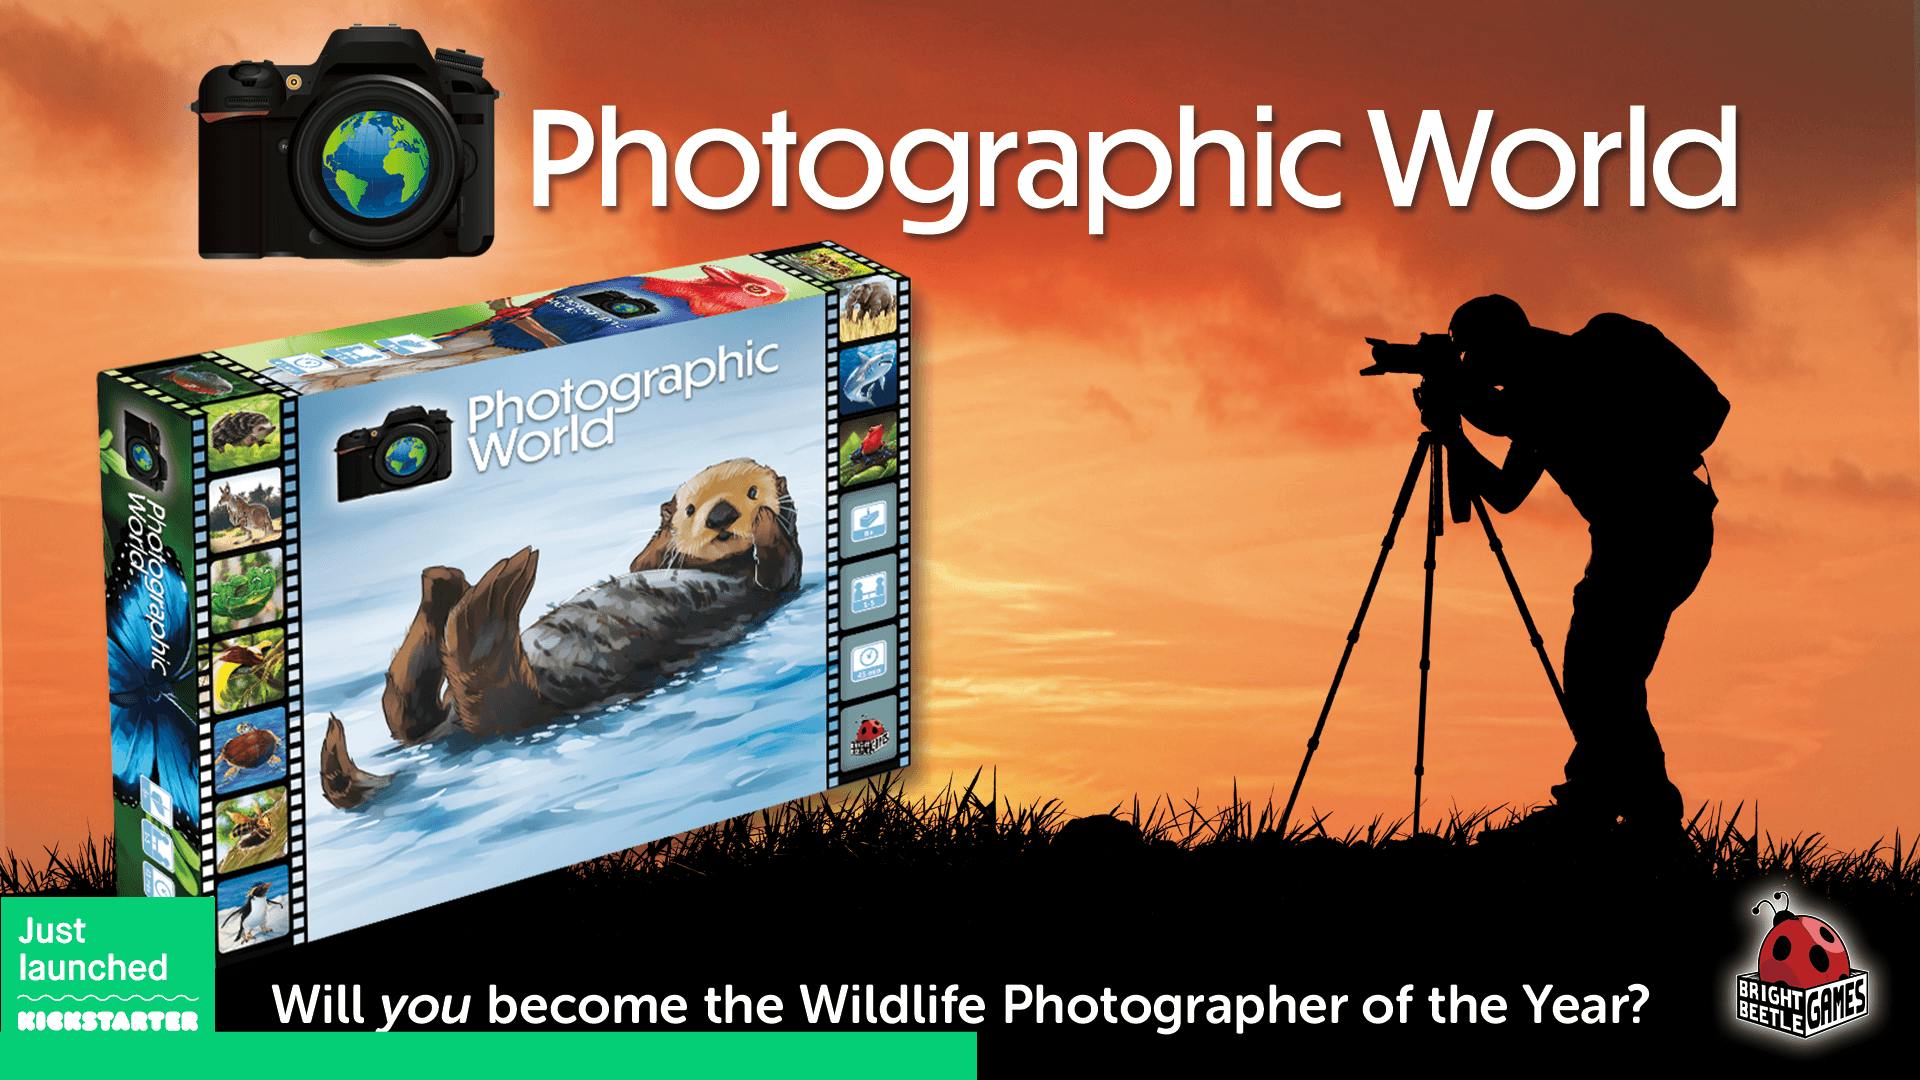 Photographic World: Will you become the Wildlife Photographer of the Year? Just launched. Bright Beetle Games.